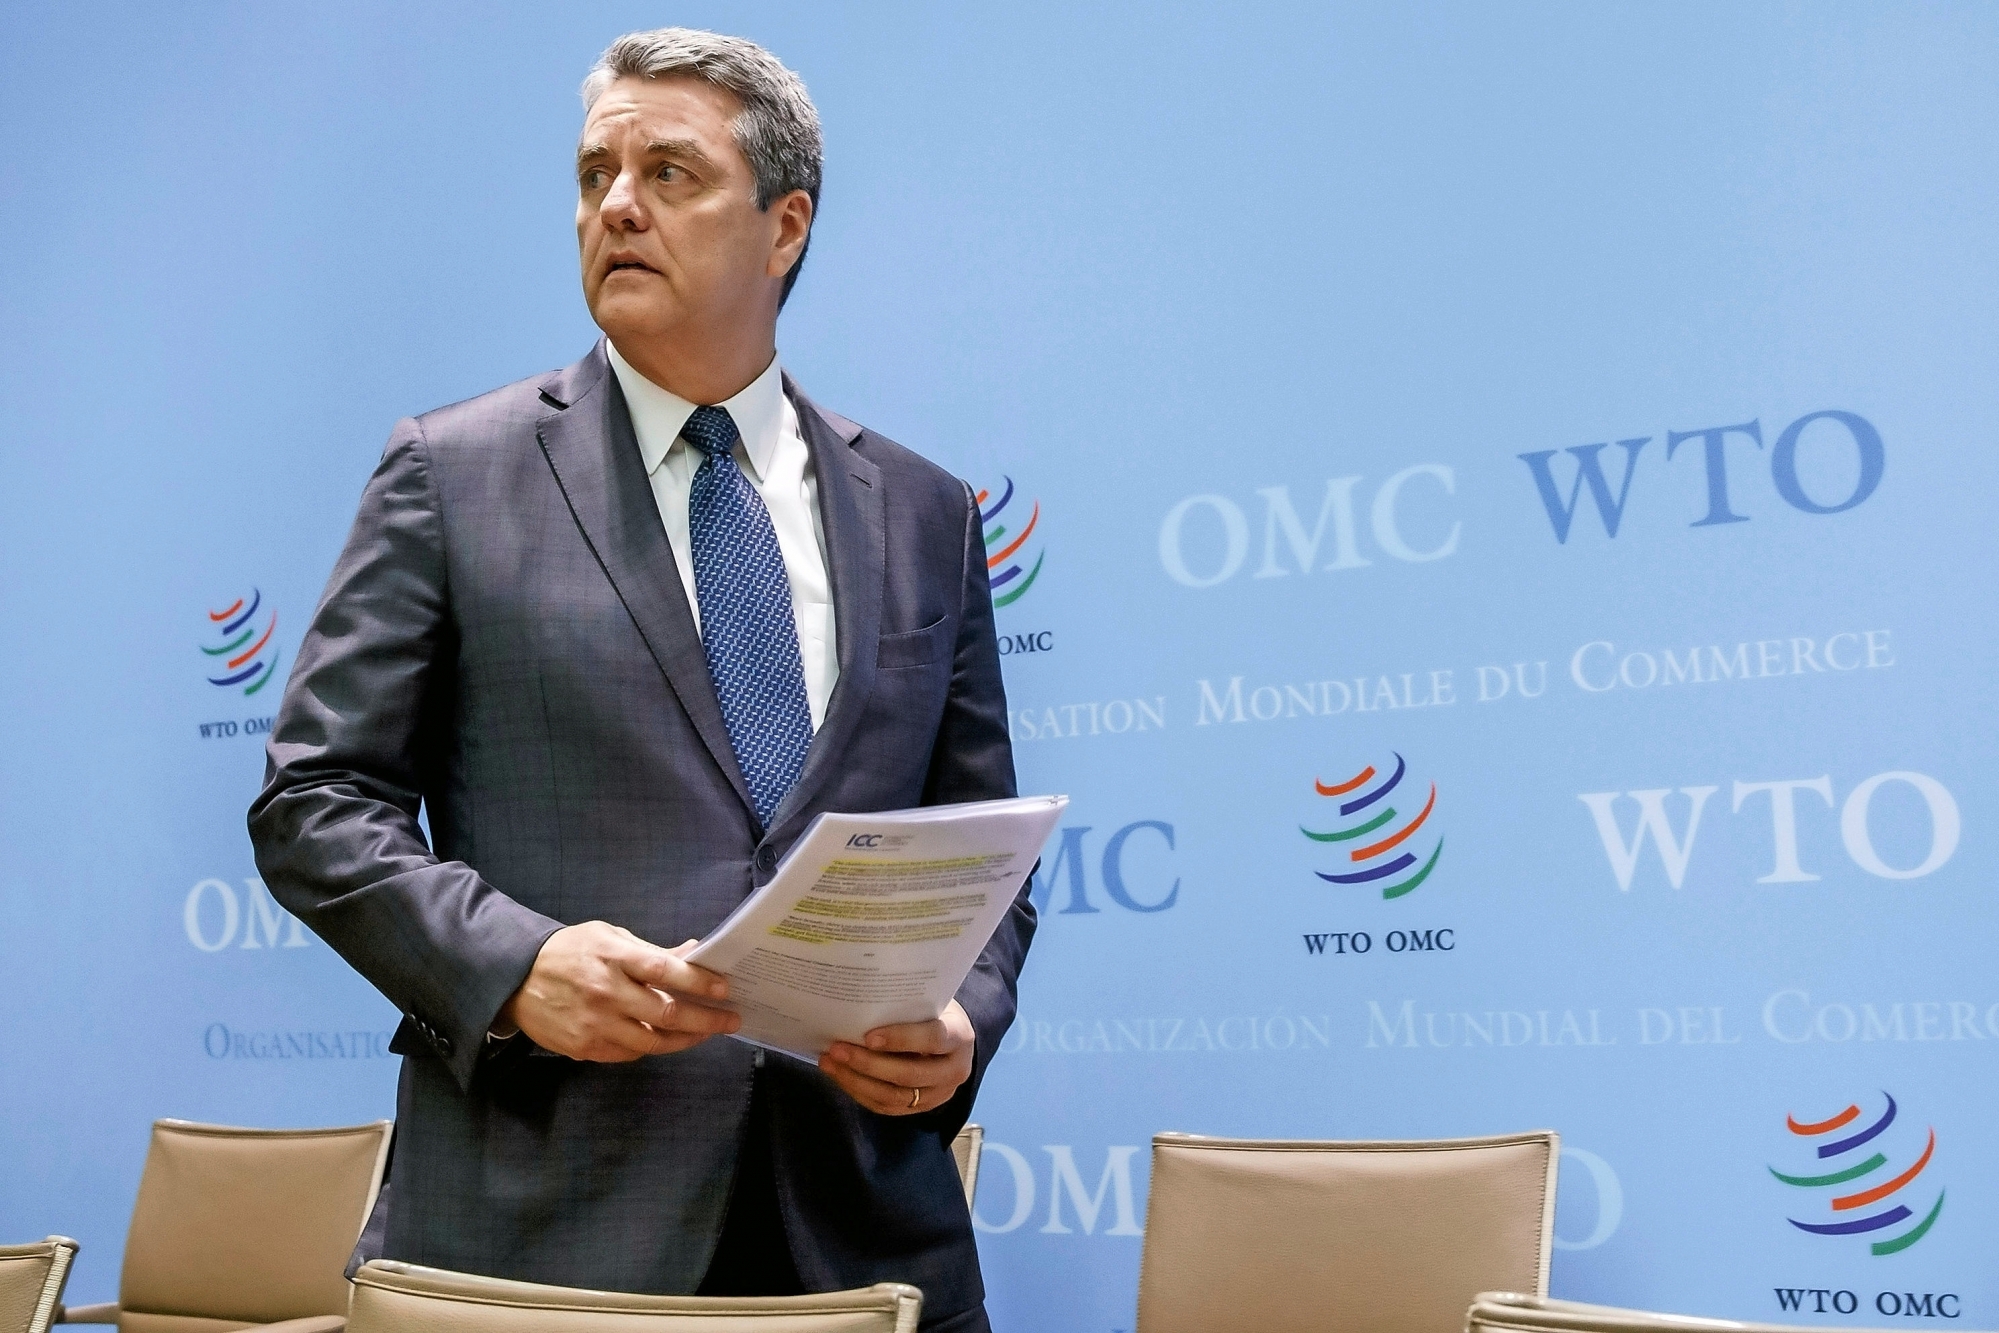 Brazilian Roberto Azevedo, Director General of the World Trade Organization, WTO, arrives for a press conference after closing the WTO's General Council, at the headquarters of the World Trade Organization, WTO, in Geneva, Switzerland, Tuesday, December 10, 2019. (KEYSTONE/Salvatore Di Nolfi)
ArcInfo